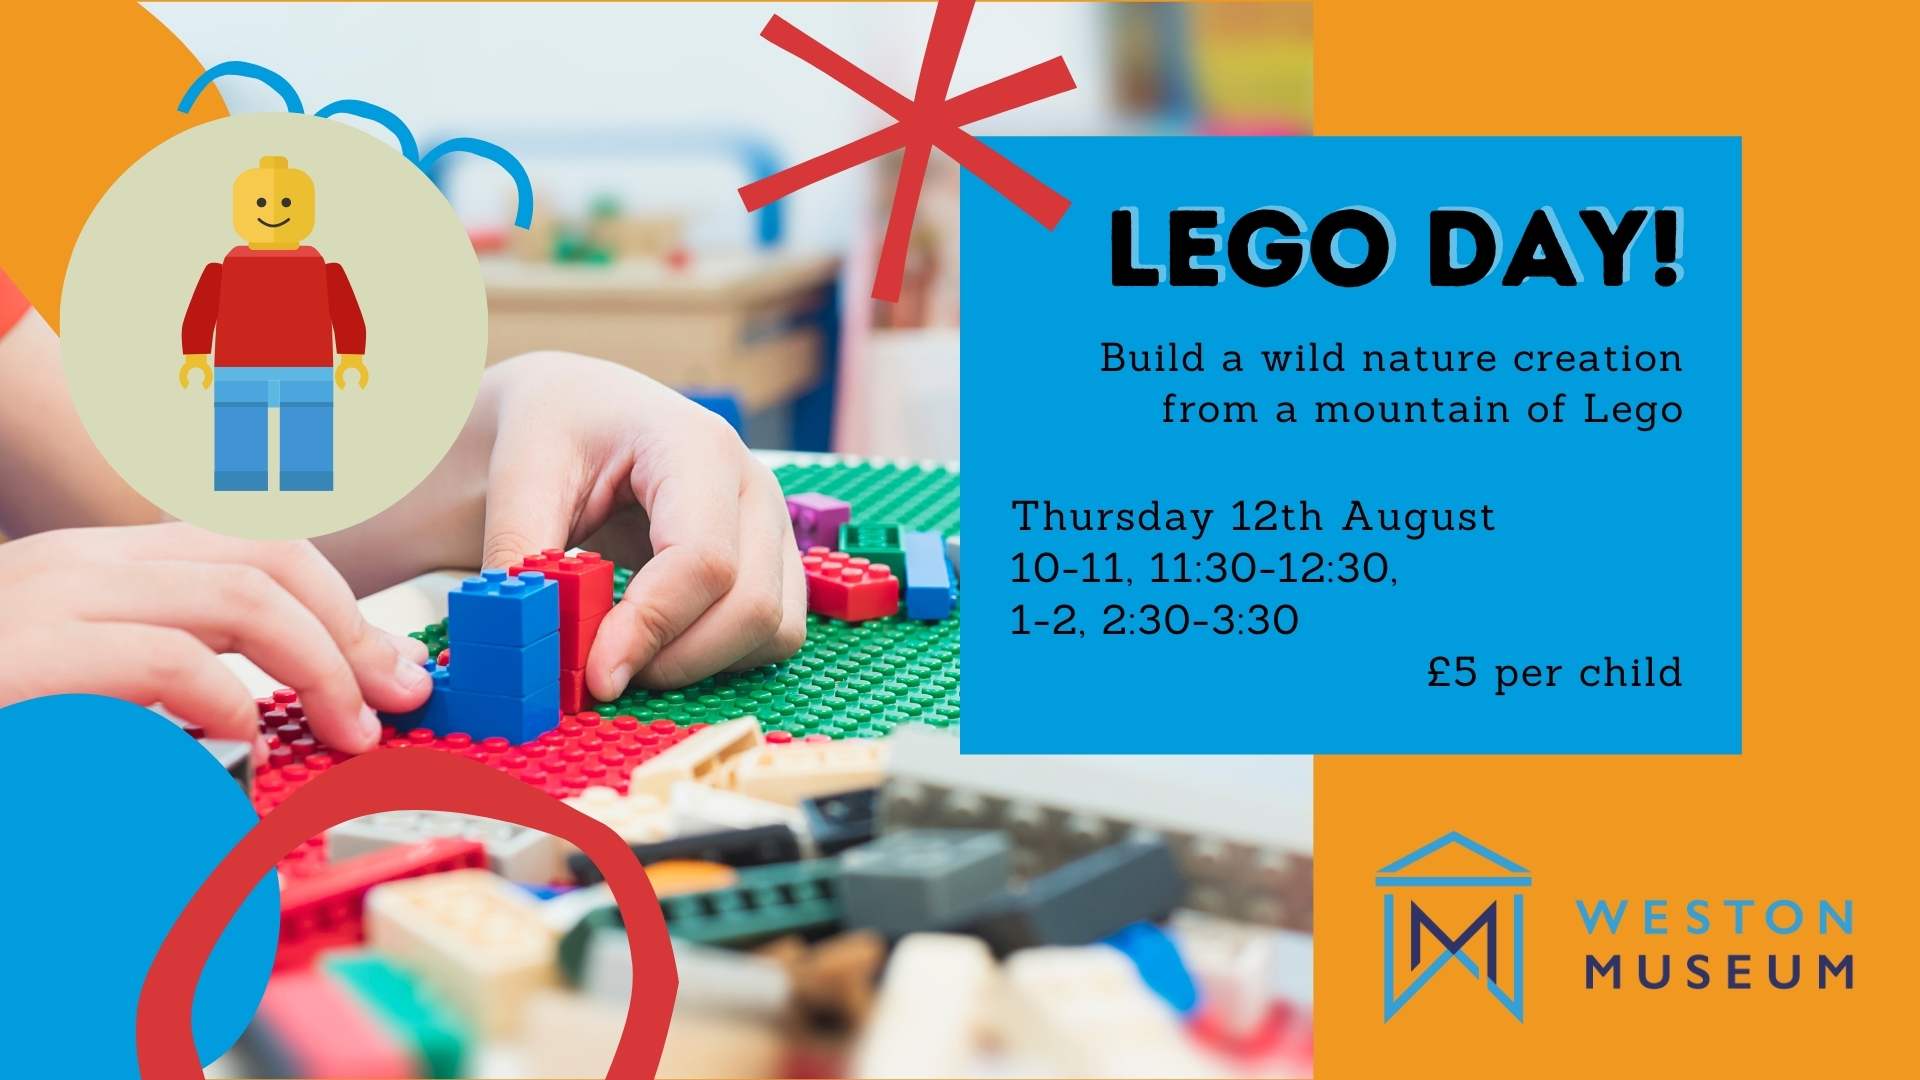 Lego Day Poster with child's hands building Lego and text showing session times